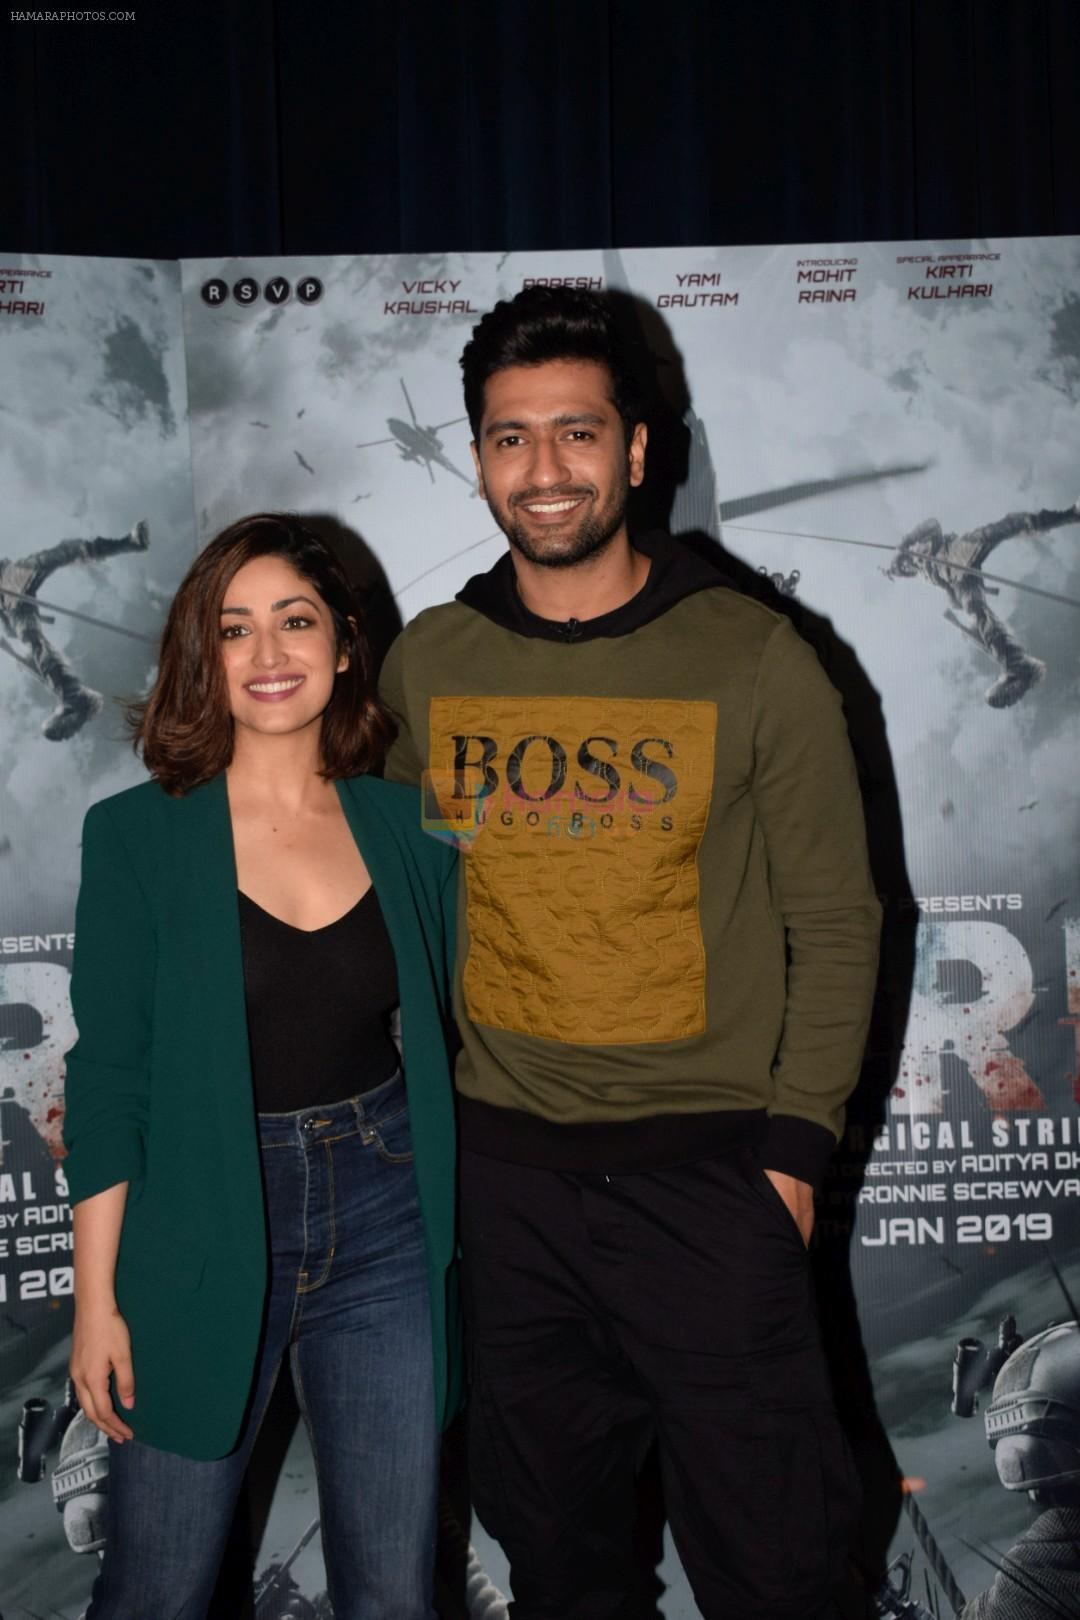 Yami Guatam, Vicky Kaushal during the media interactions for thier film Uri in jw marriott juhu on 22nd Dec 2018